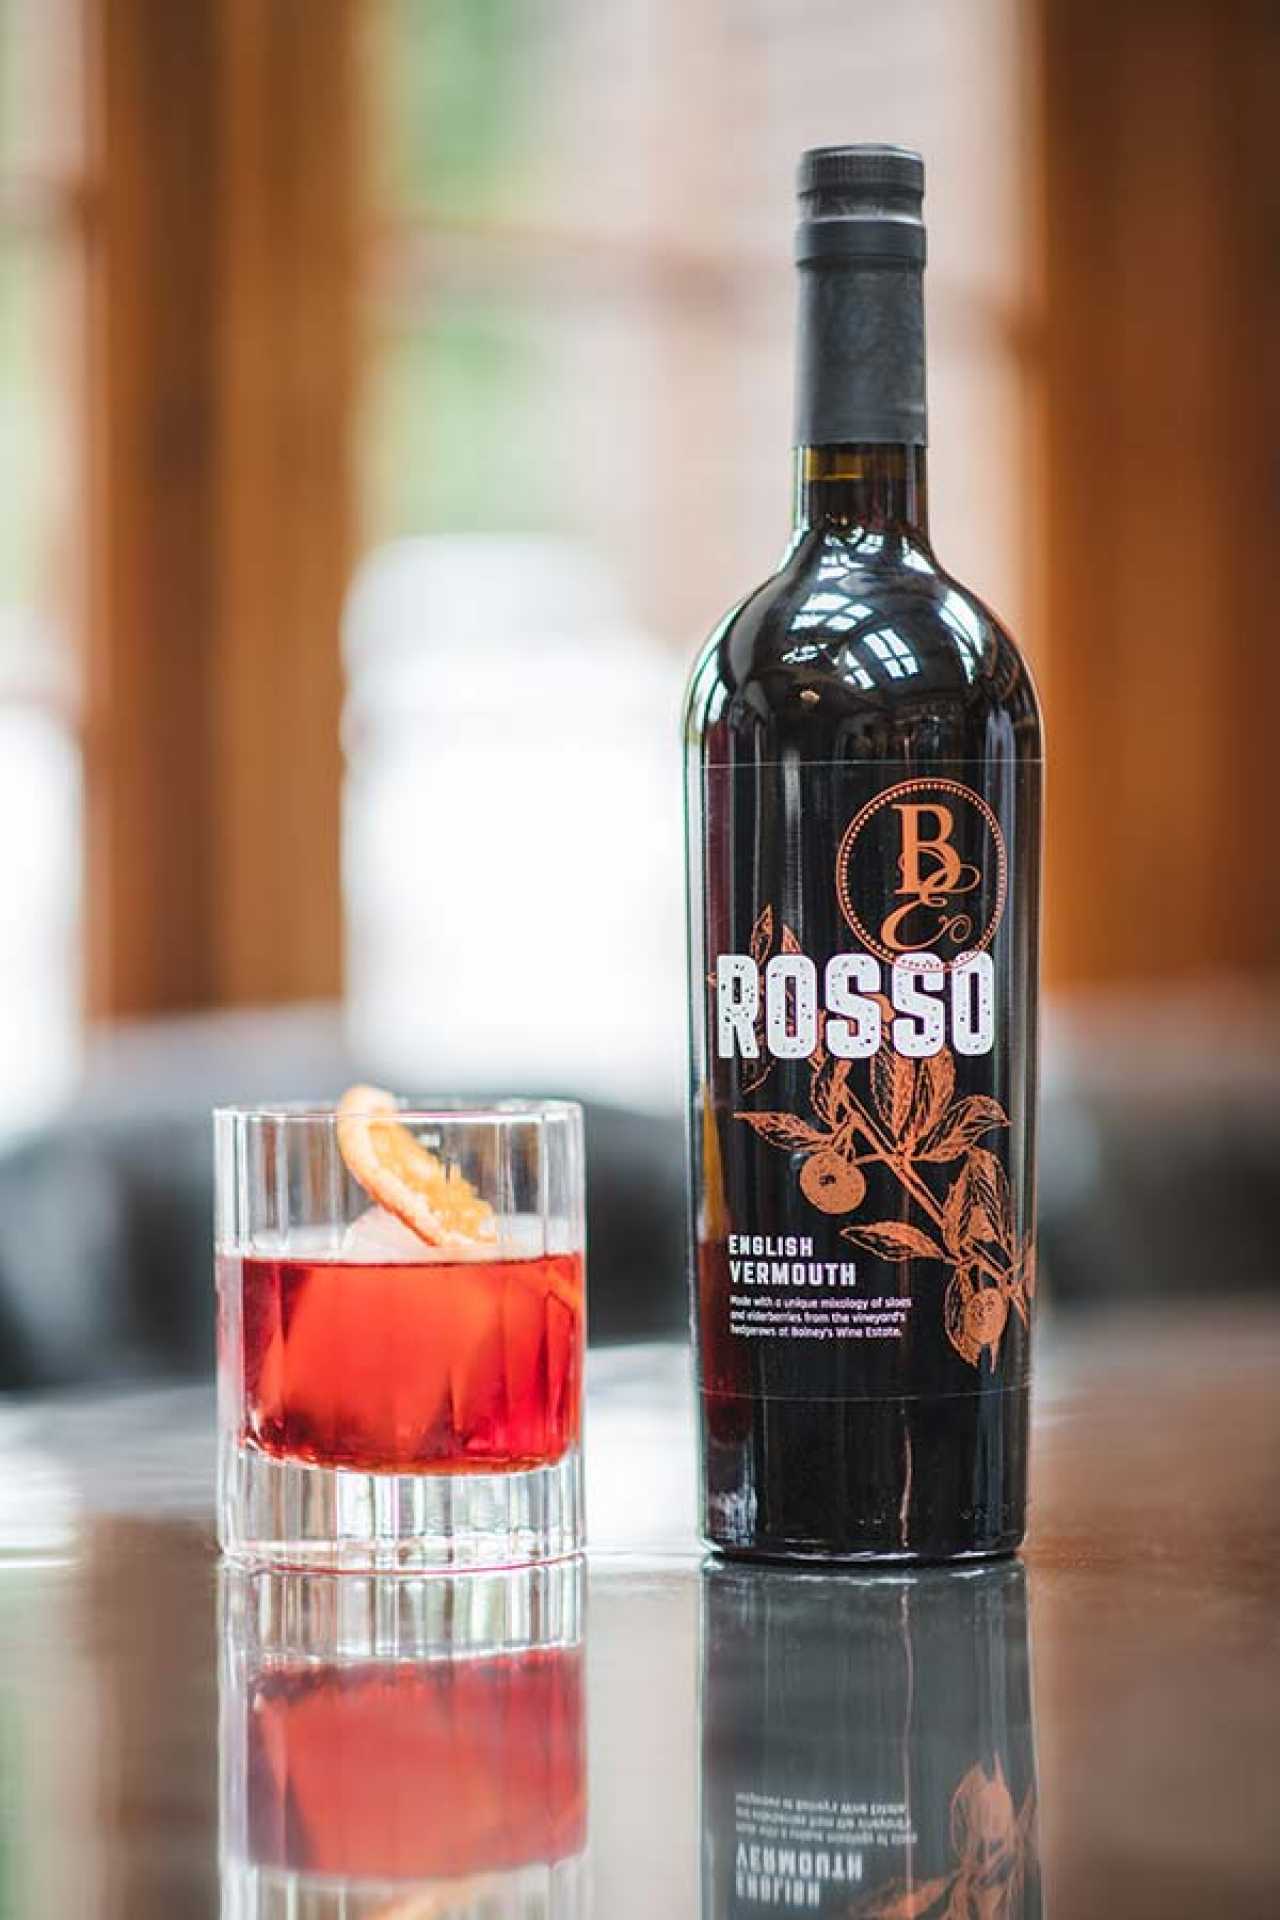 The Hand and Flowers's Bolney rosso negroni